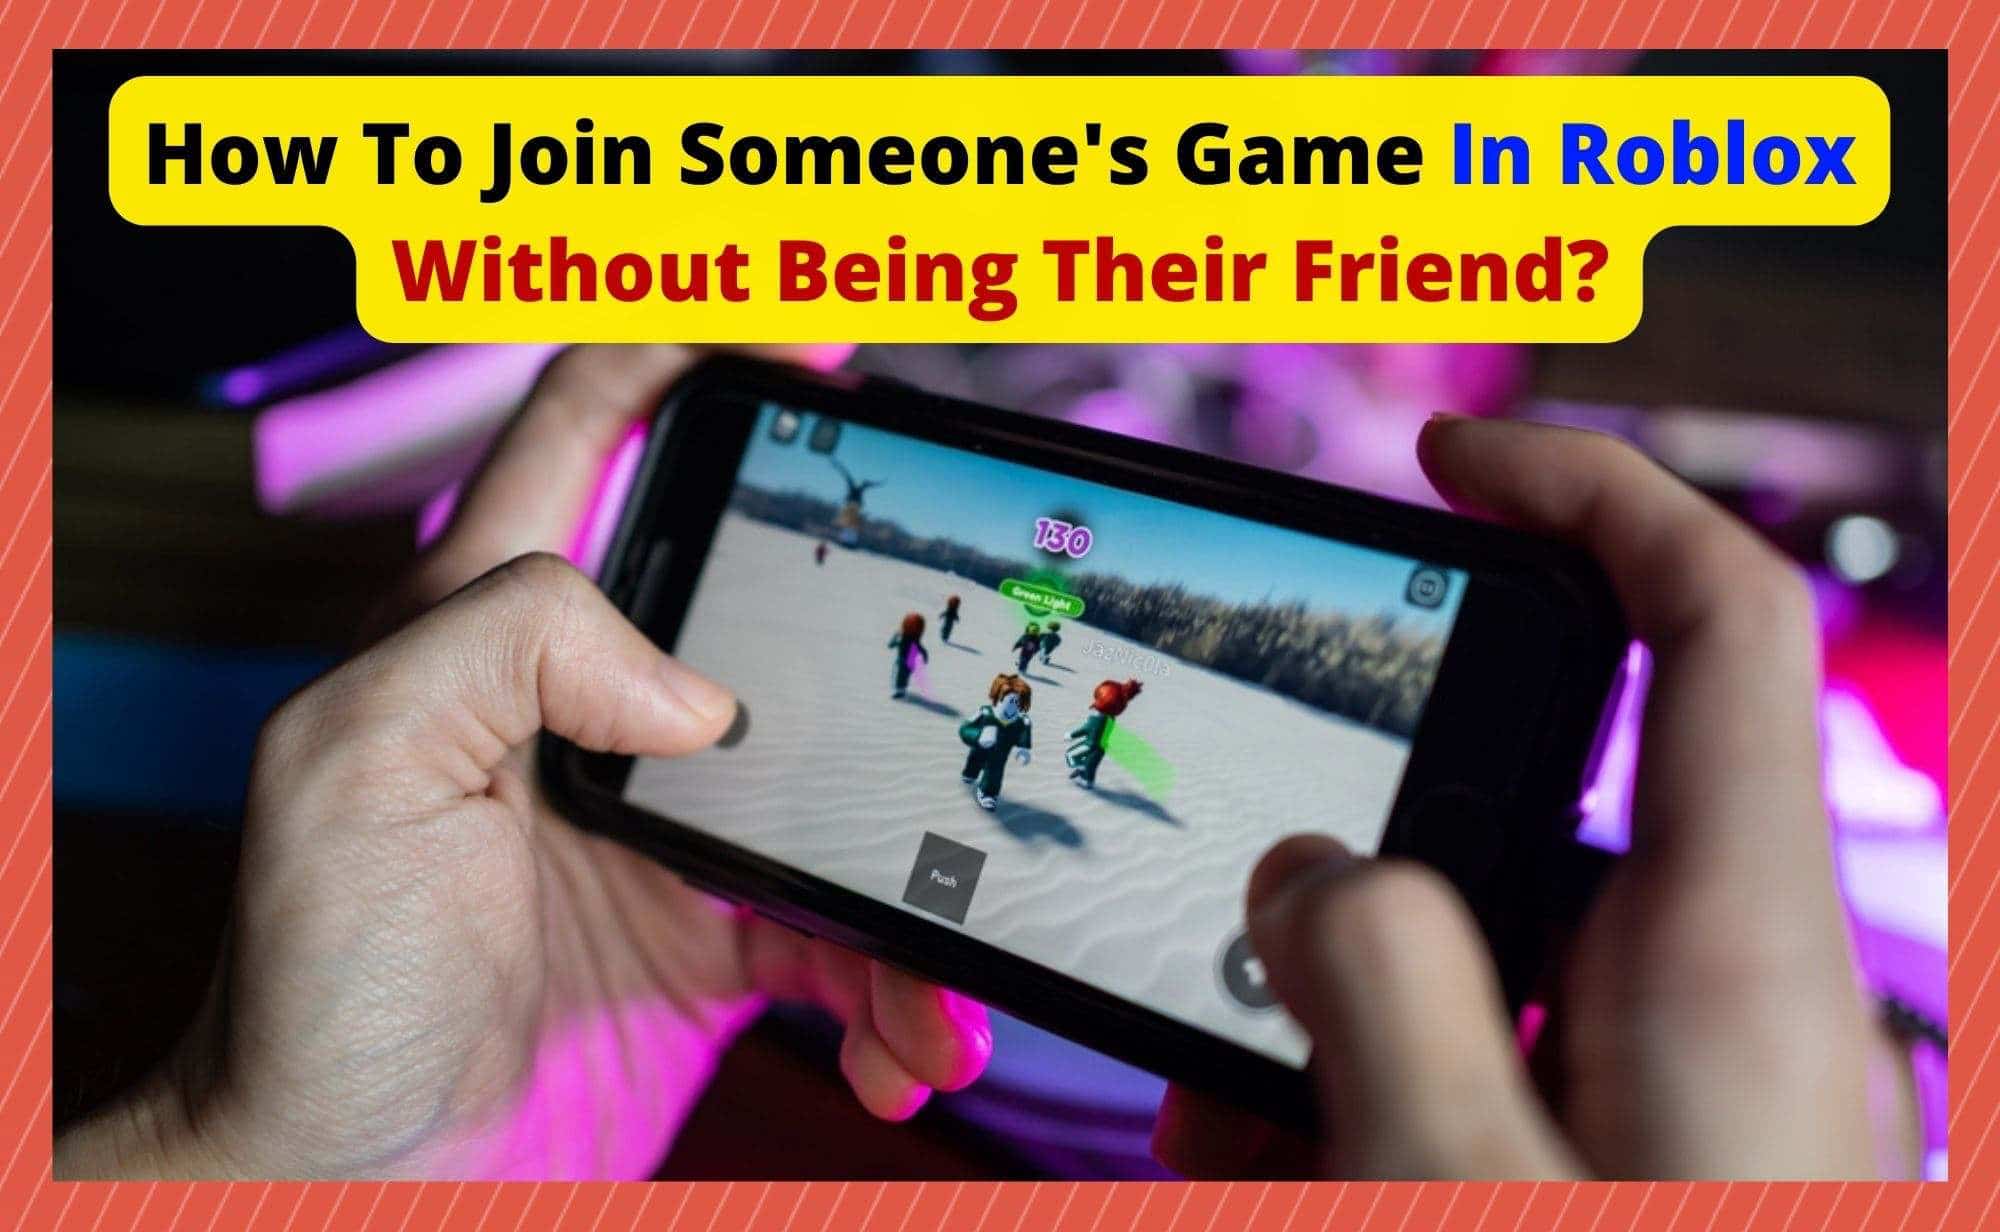 How To Join Someones Game In Roblox Without Being Their Friend